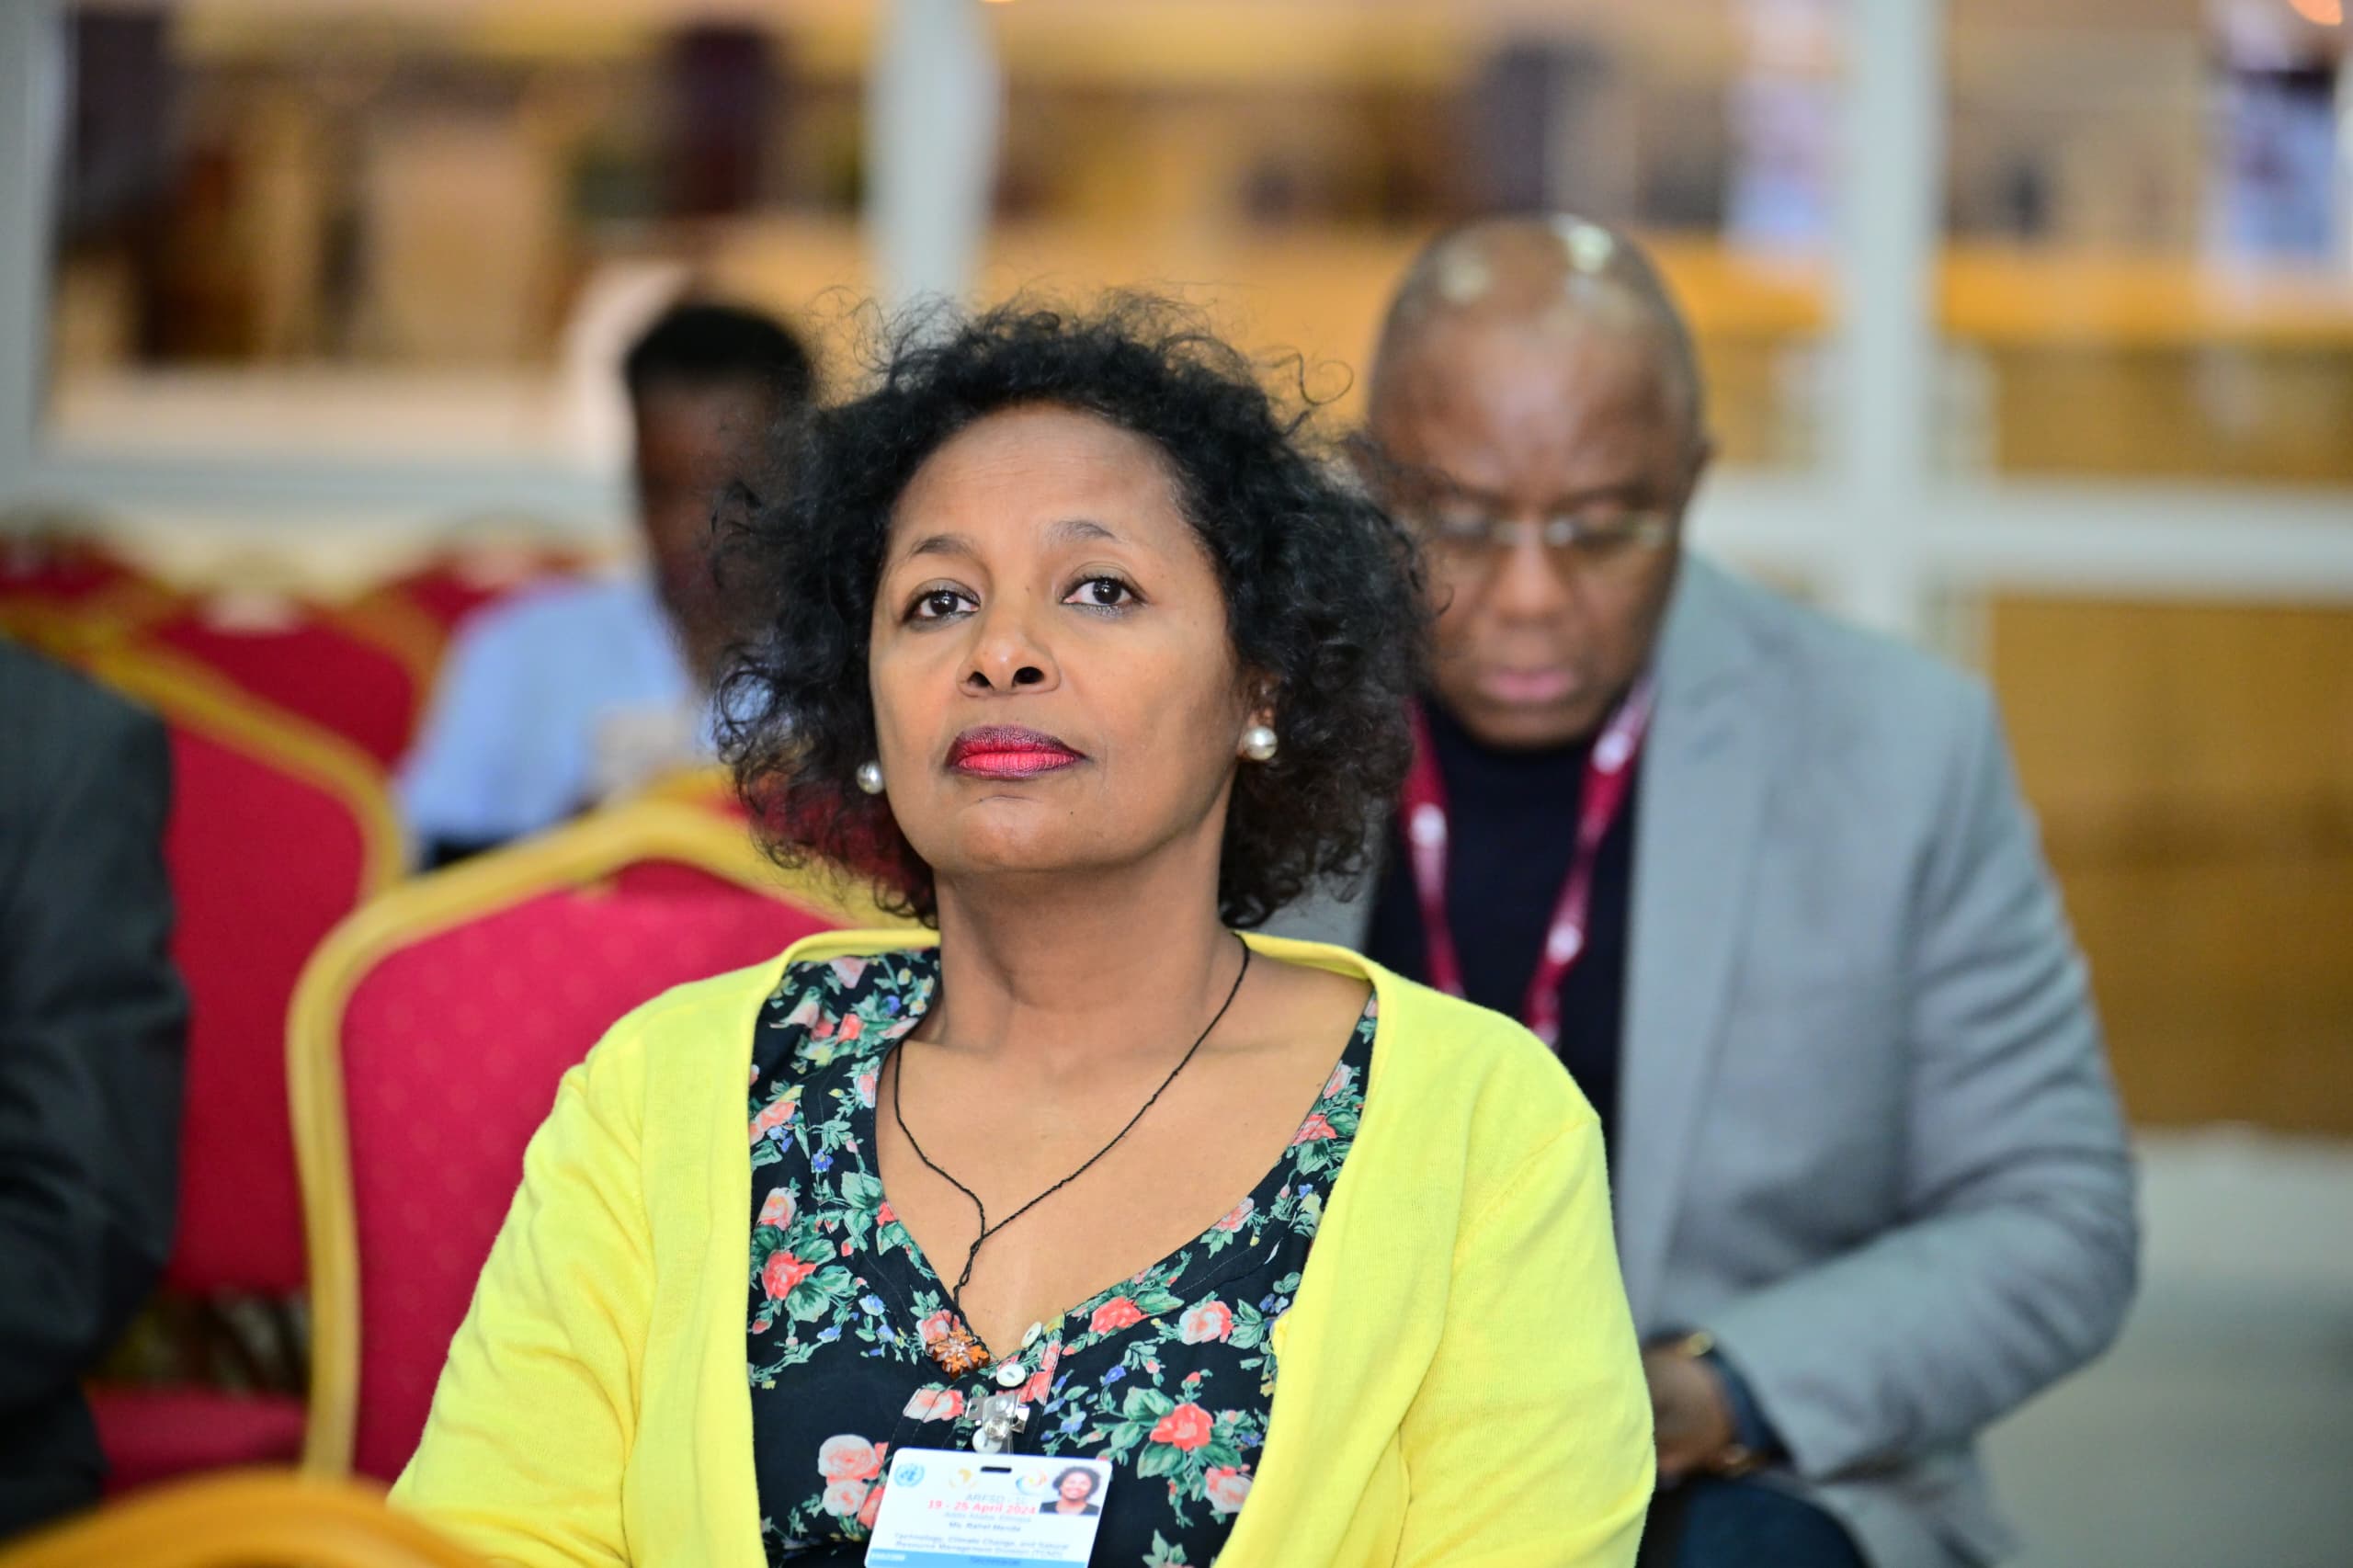 6th African Science, Technology and Innovation Forum in pictures